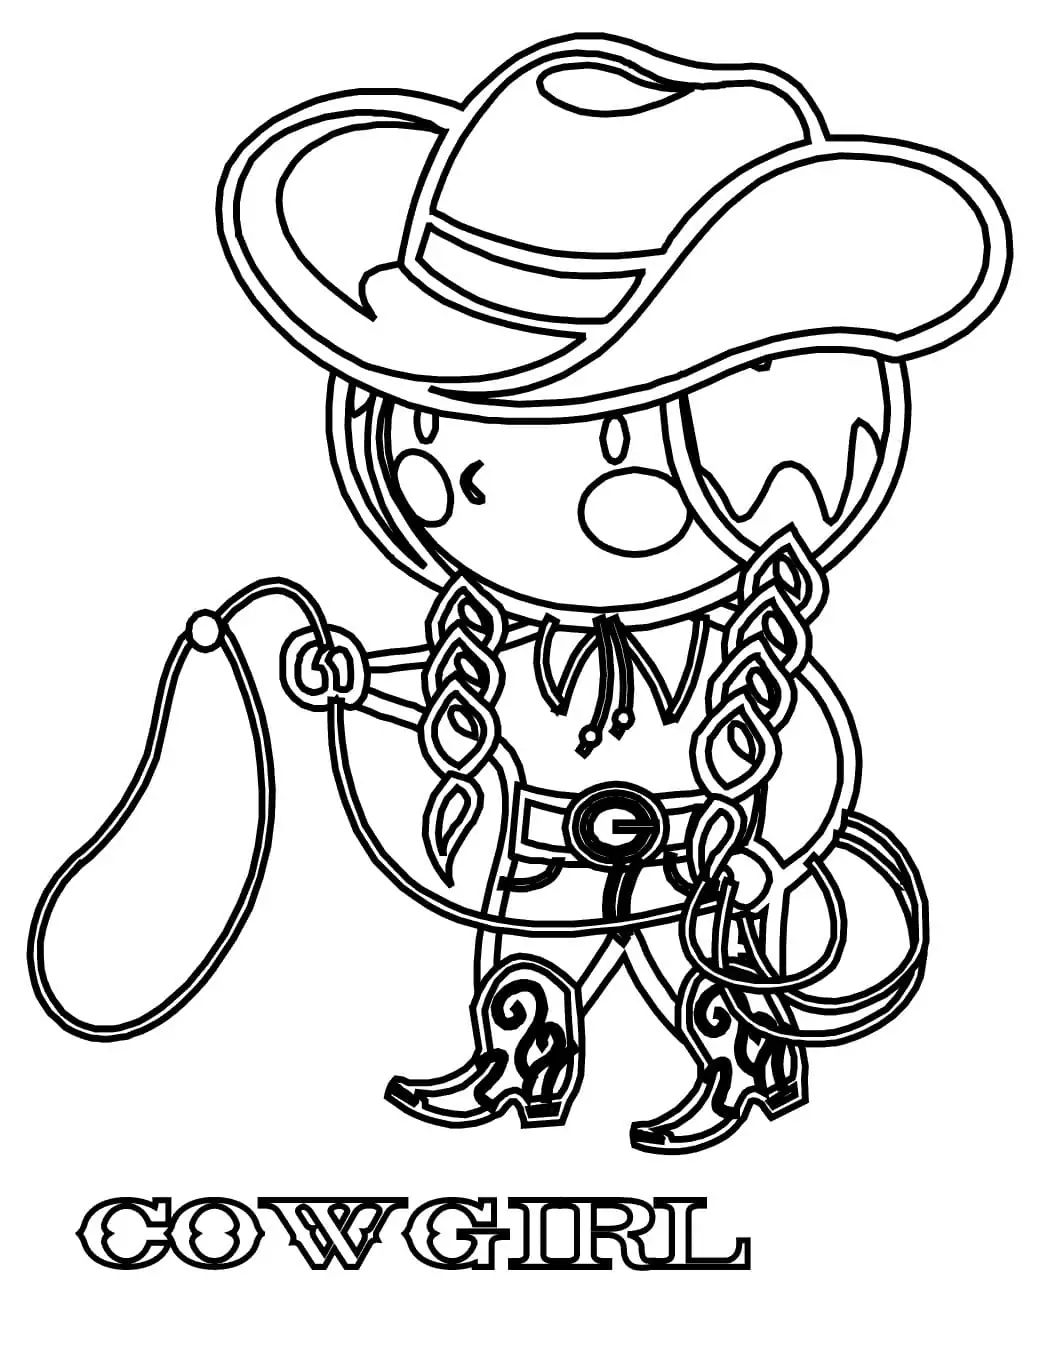 Free Cowgirl to Print